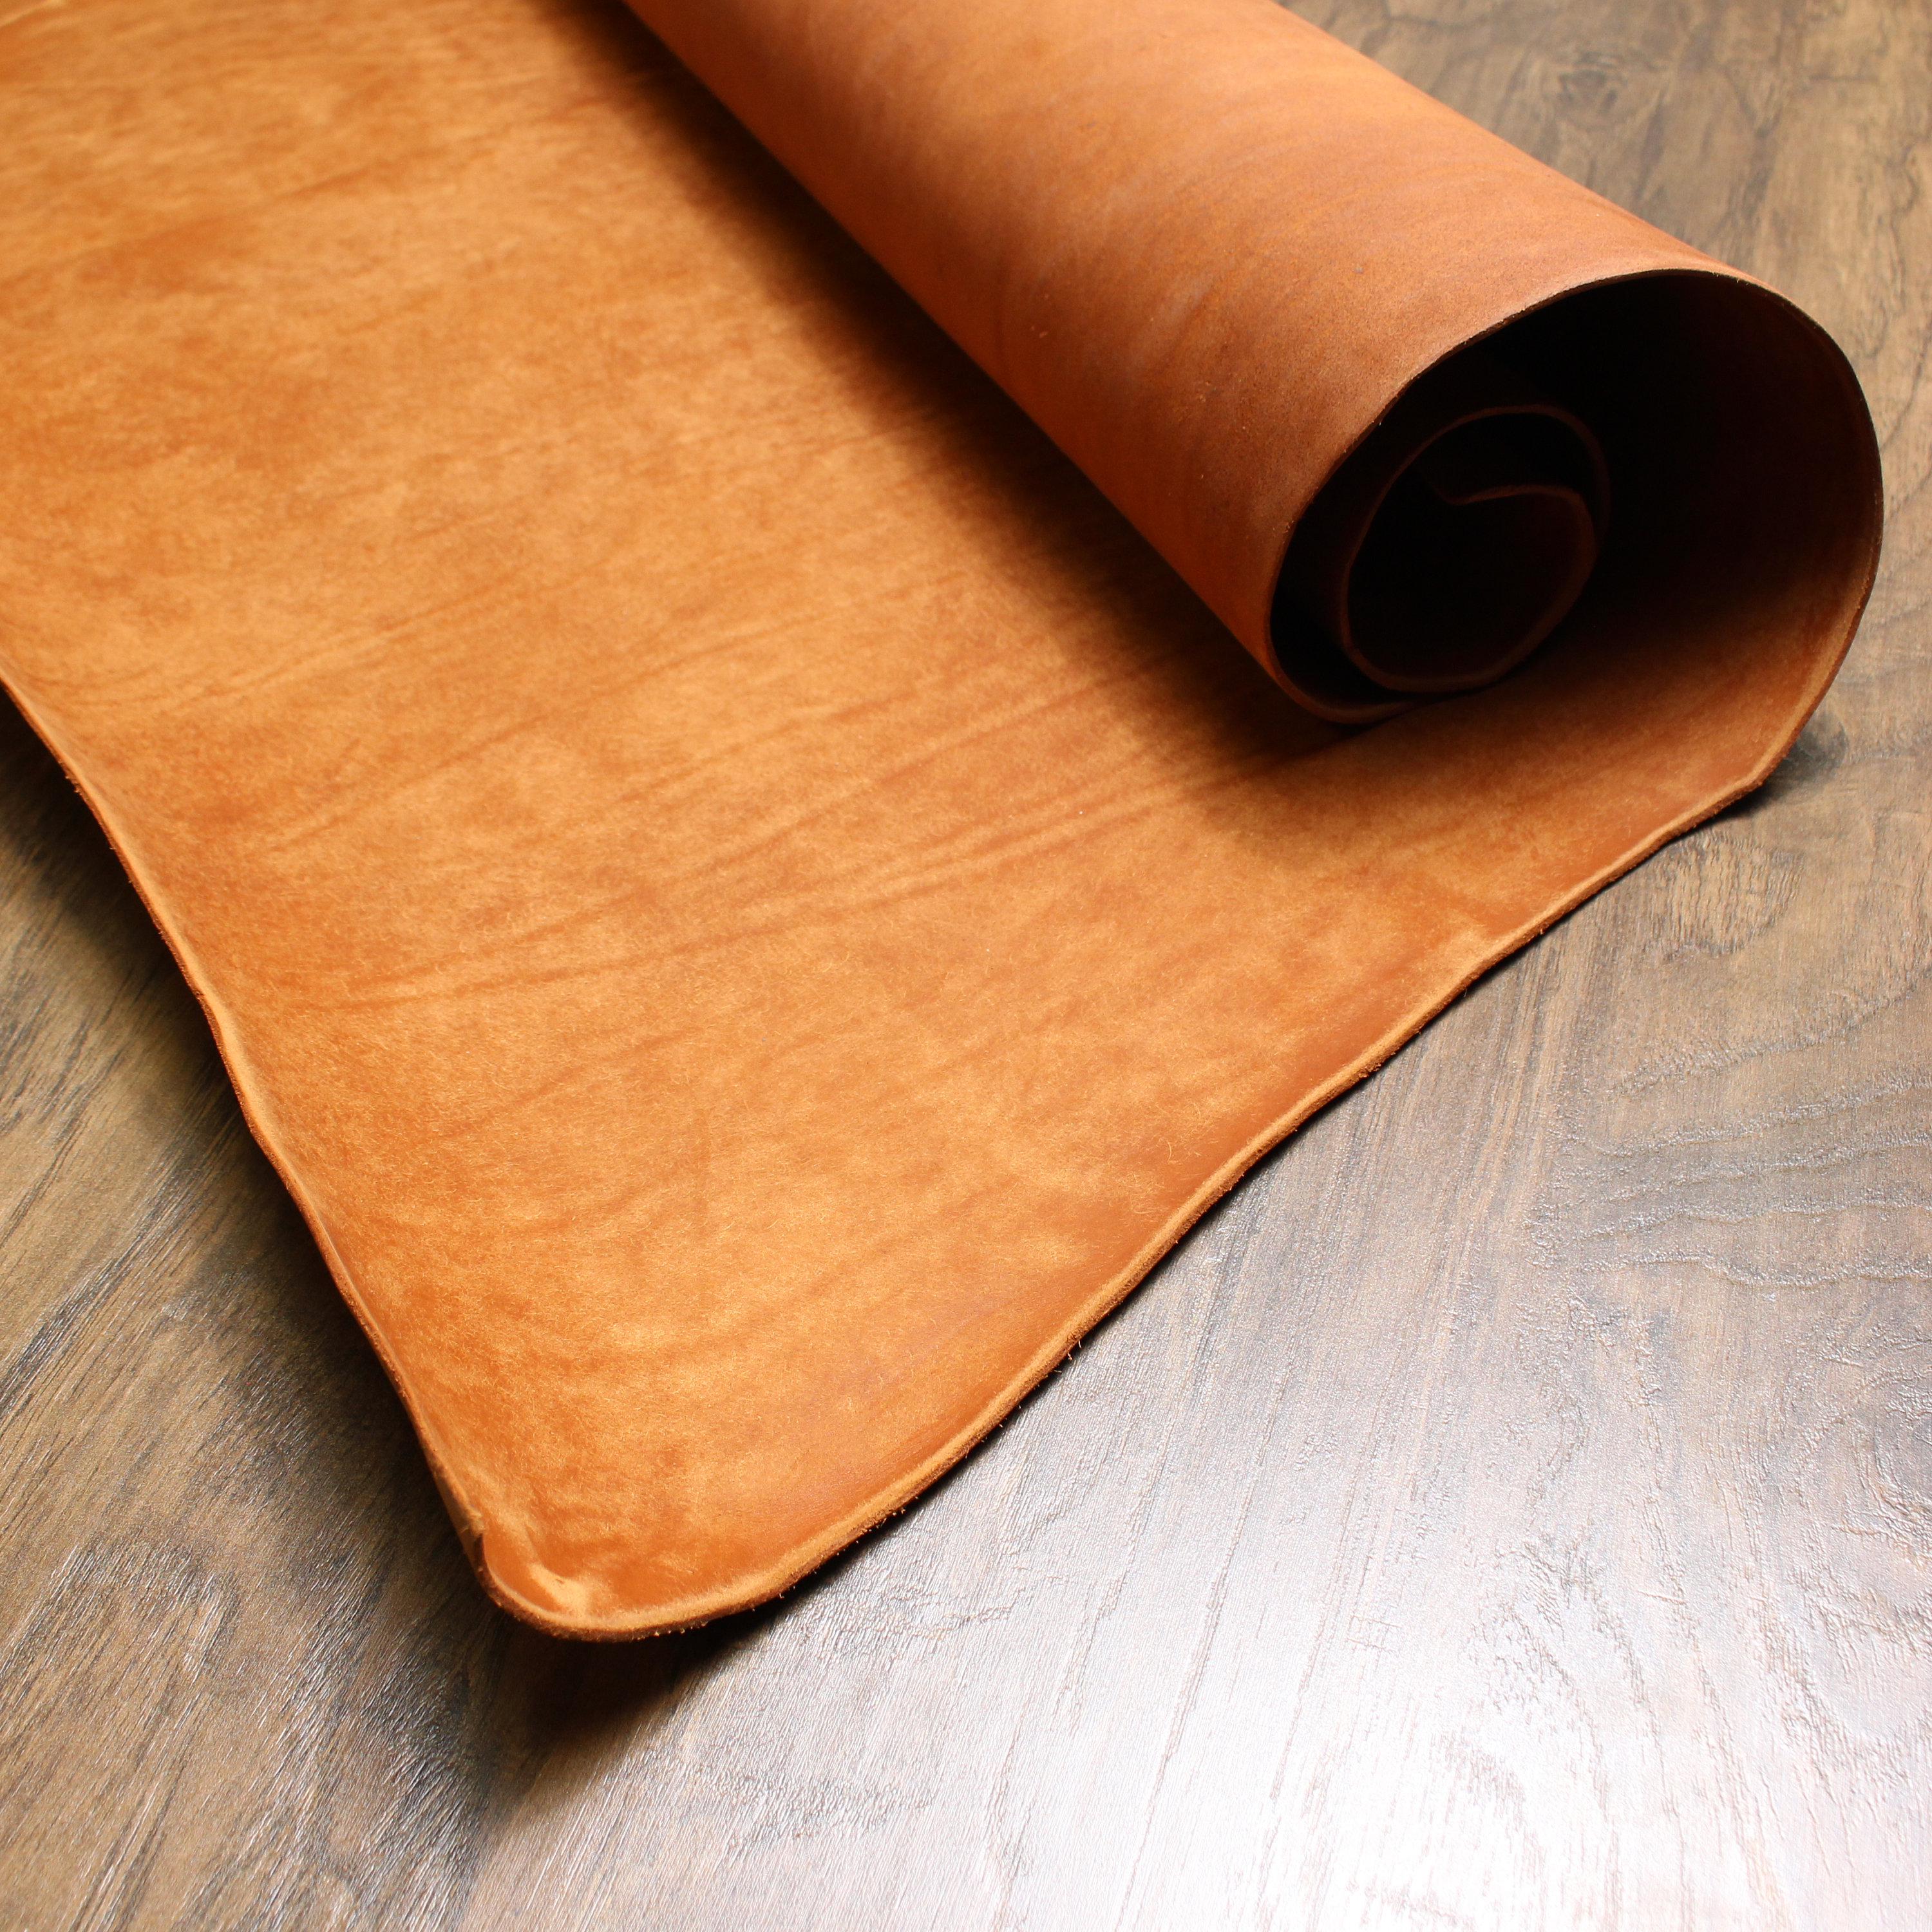 VEG TAN Leather, Tooling Leather, Genuine Leather, Vegetable Tan Leather,  Firm Leather, Thick Leather, Crafting Leather, 2mm / 4 5 Oz 